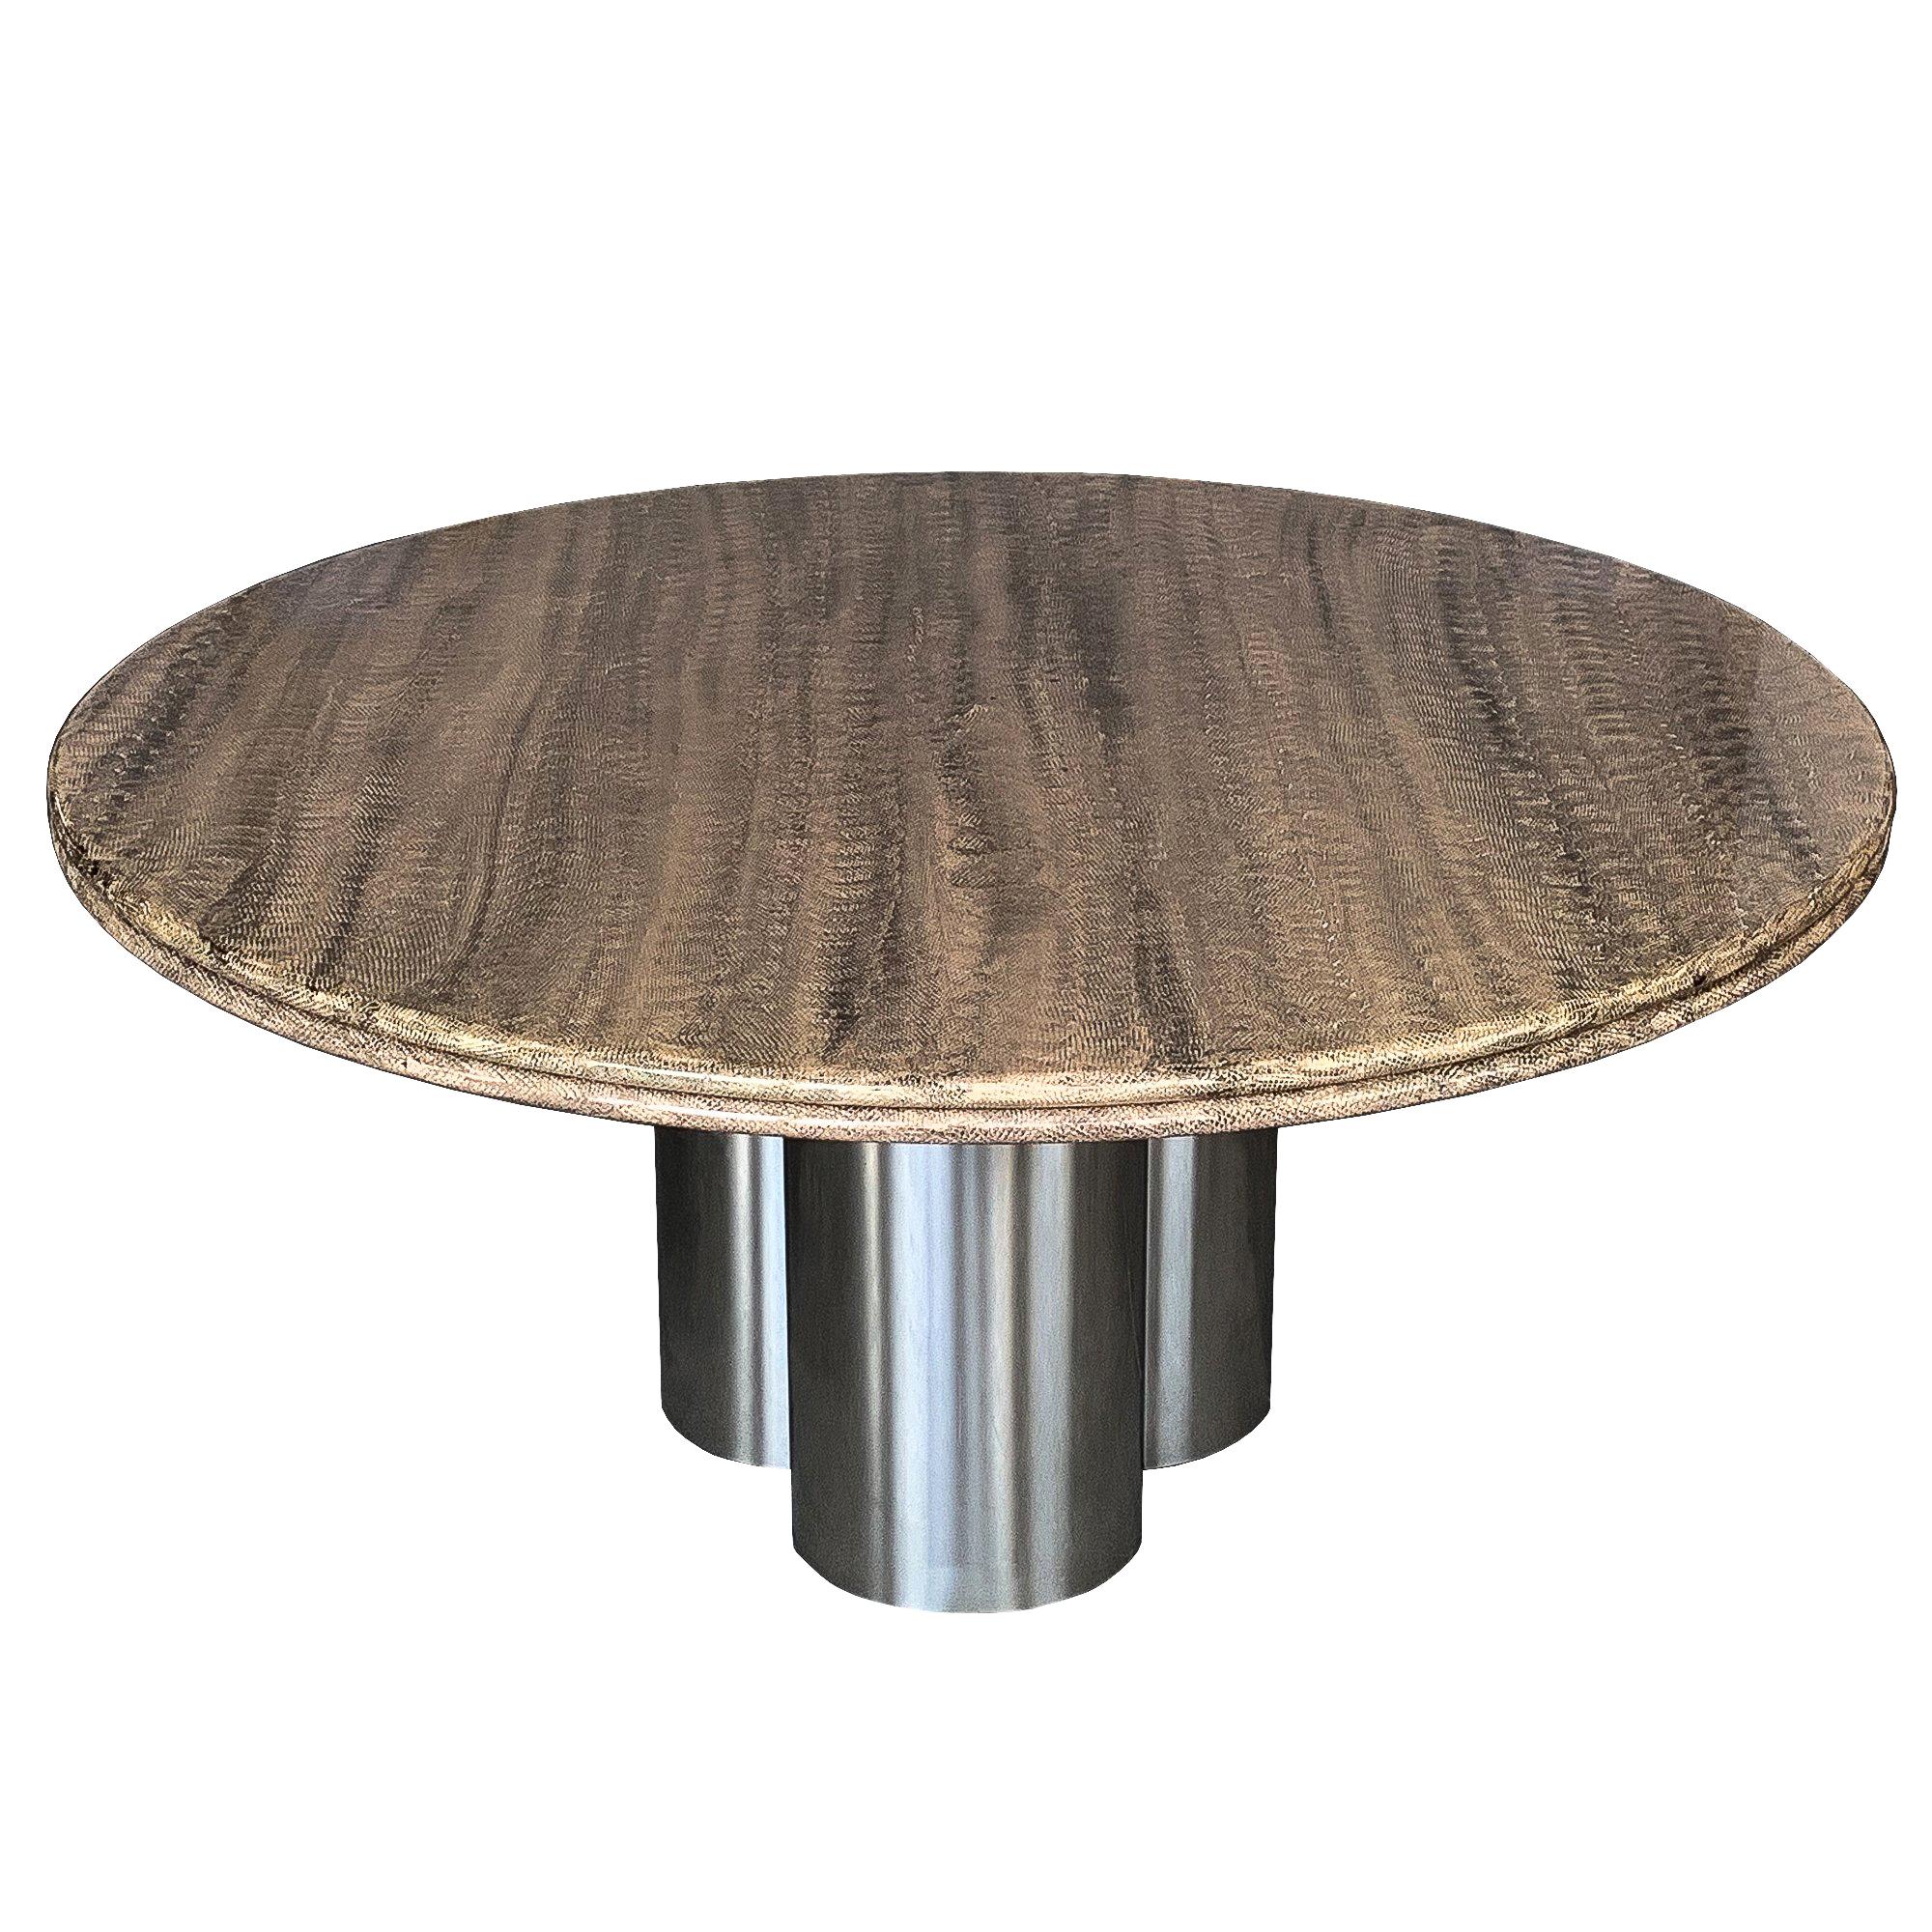 Pace Collection Faux Snakeskin Chrome Pedestal Dining Table